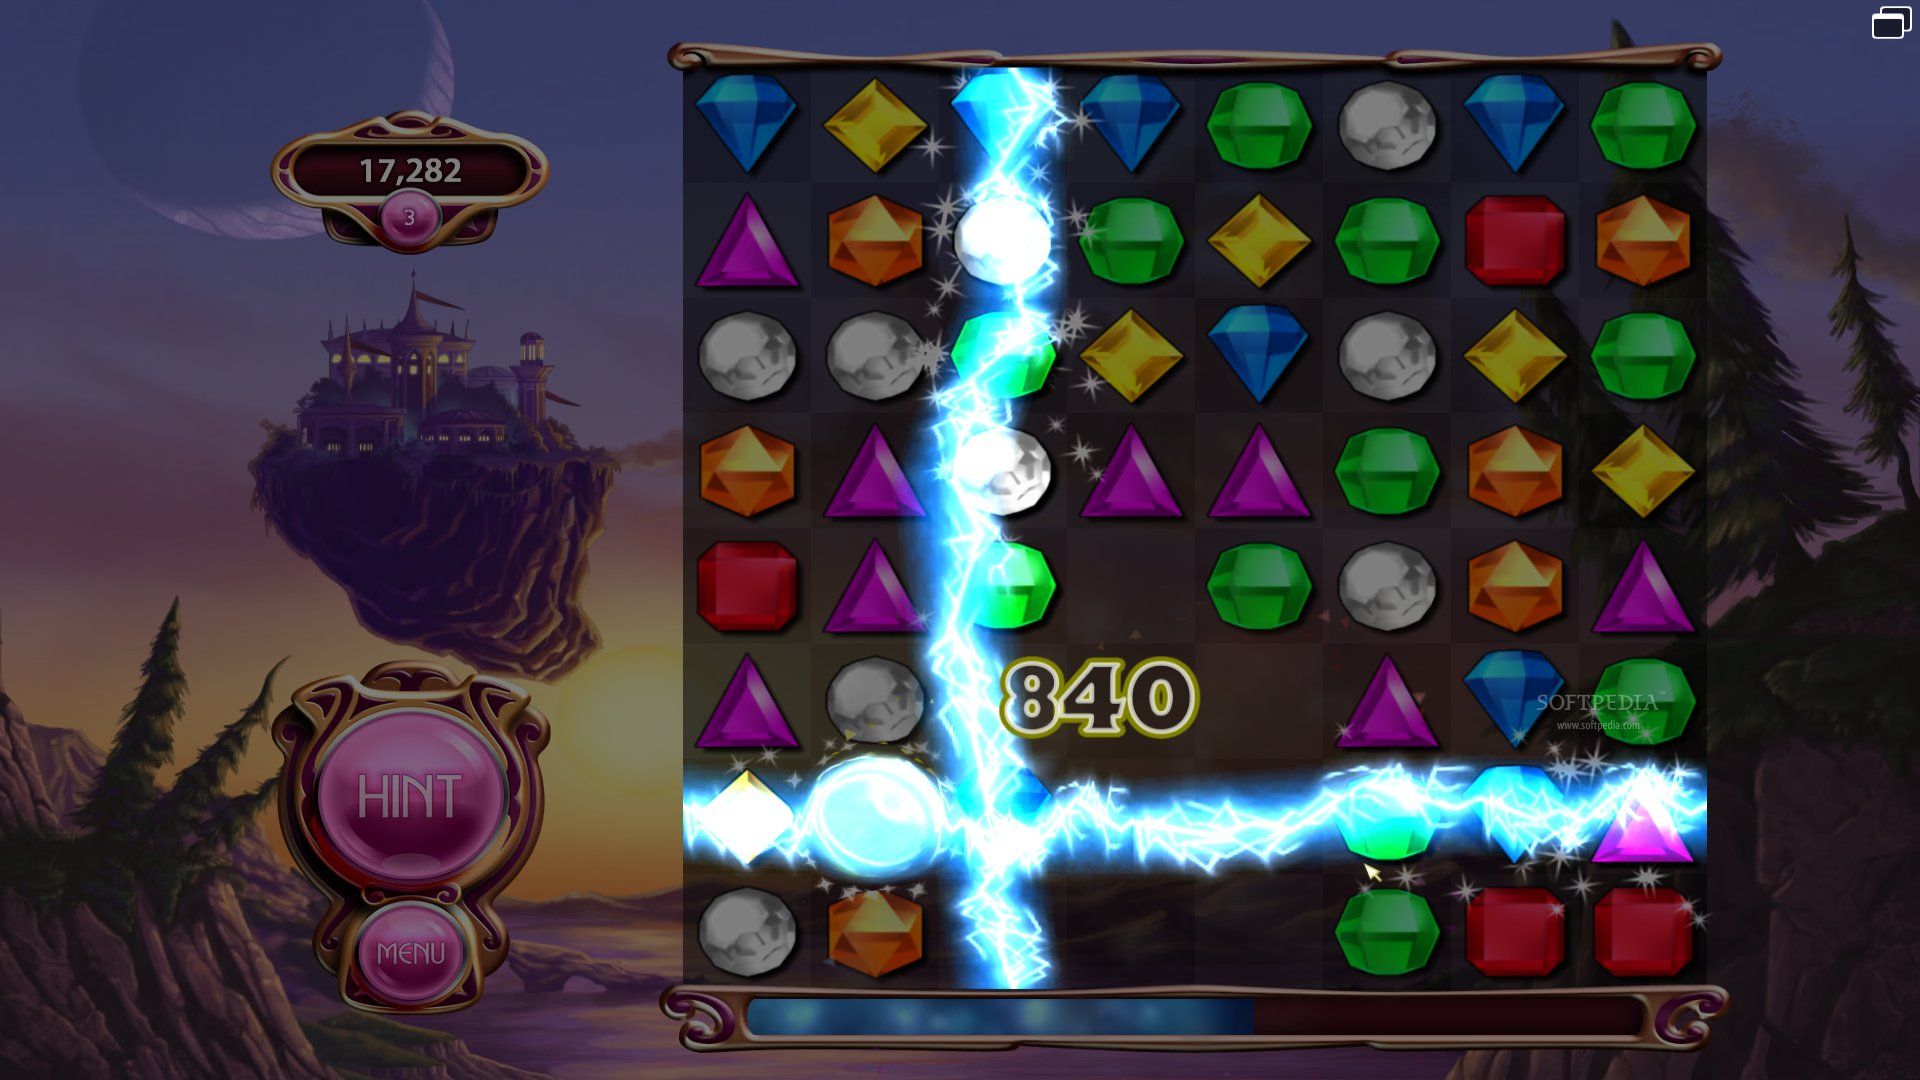 Review of Bejeweled 3 by PopCap: 8 games in 1 - HubPages